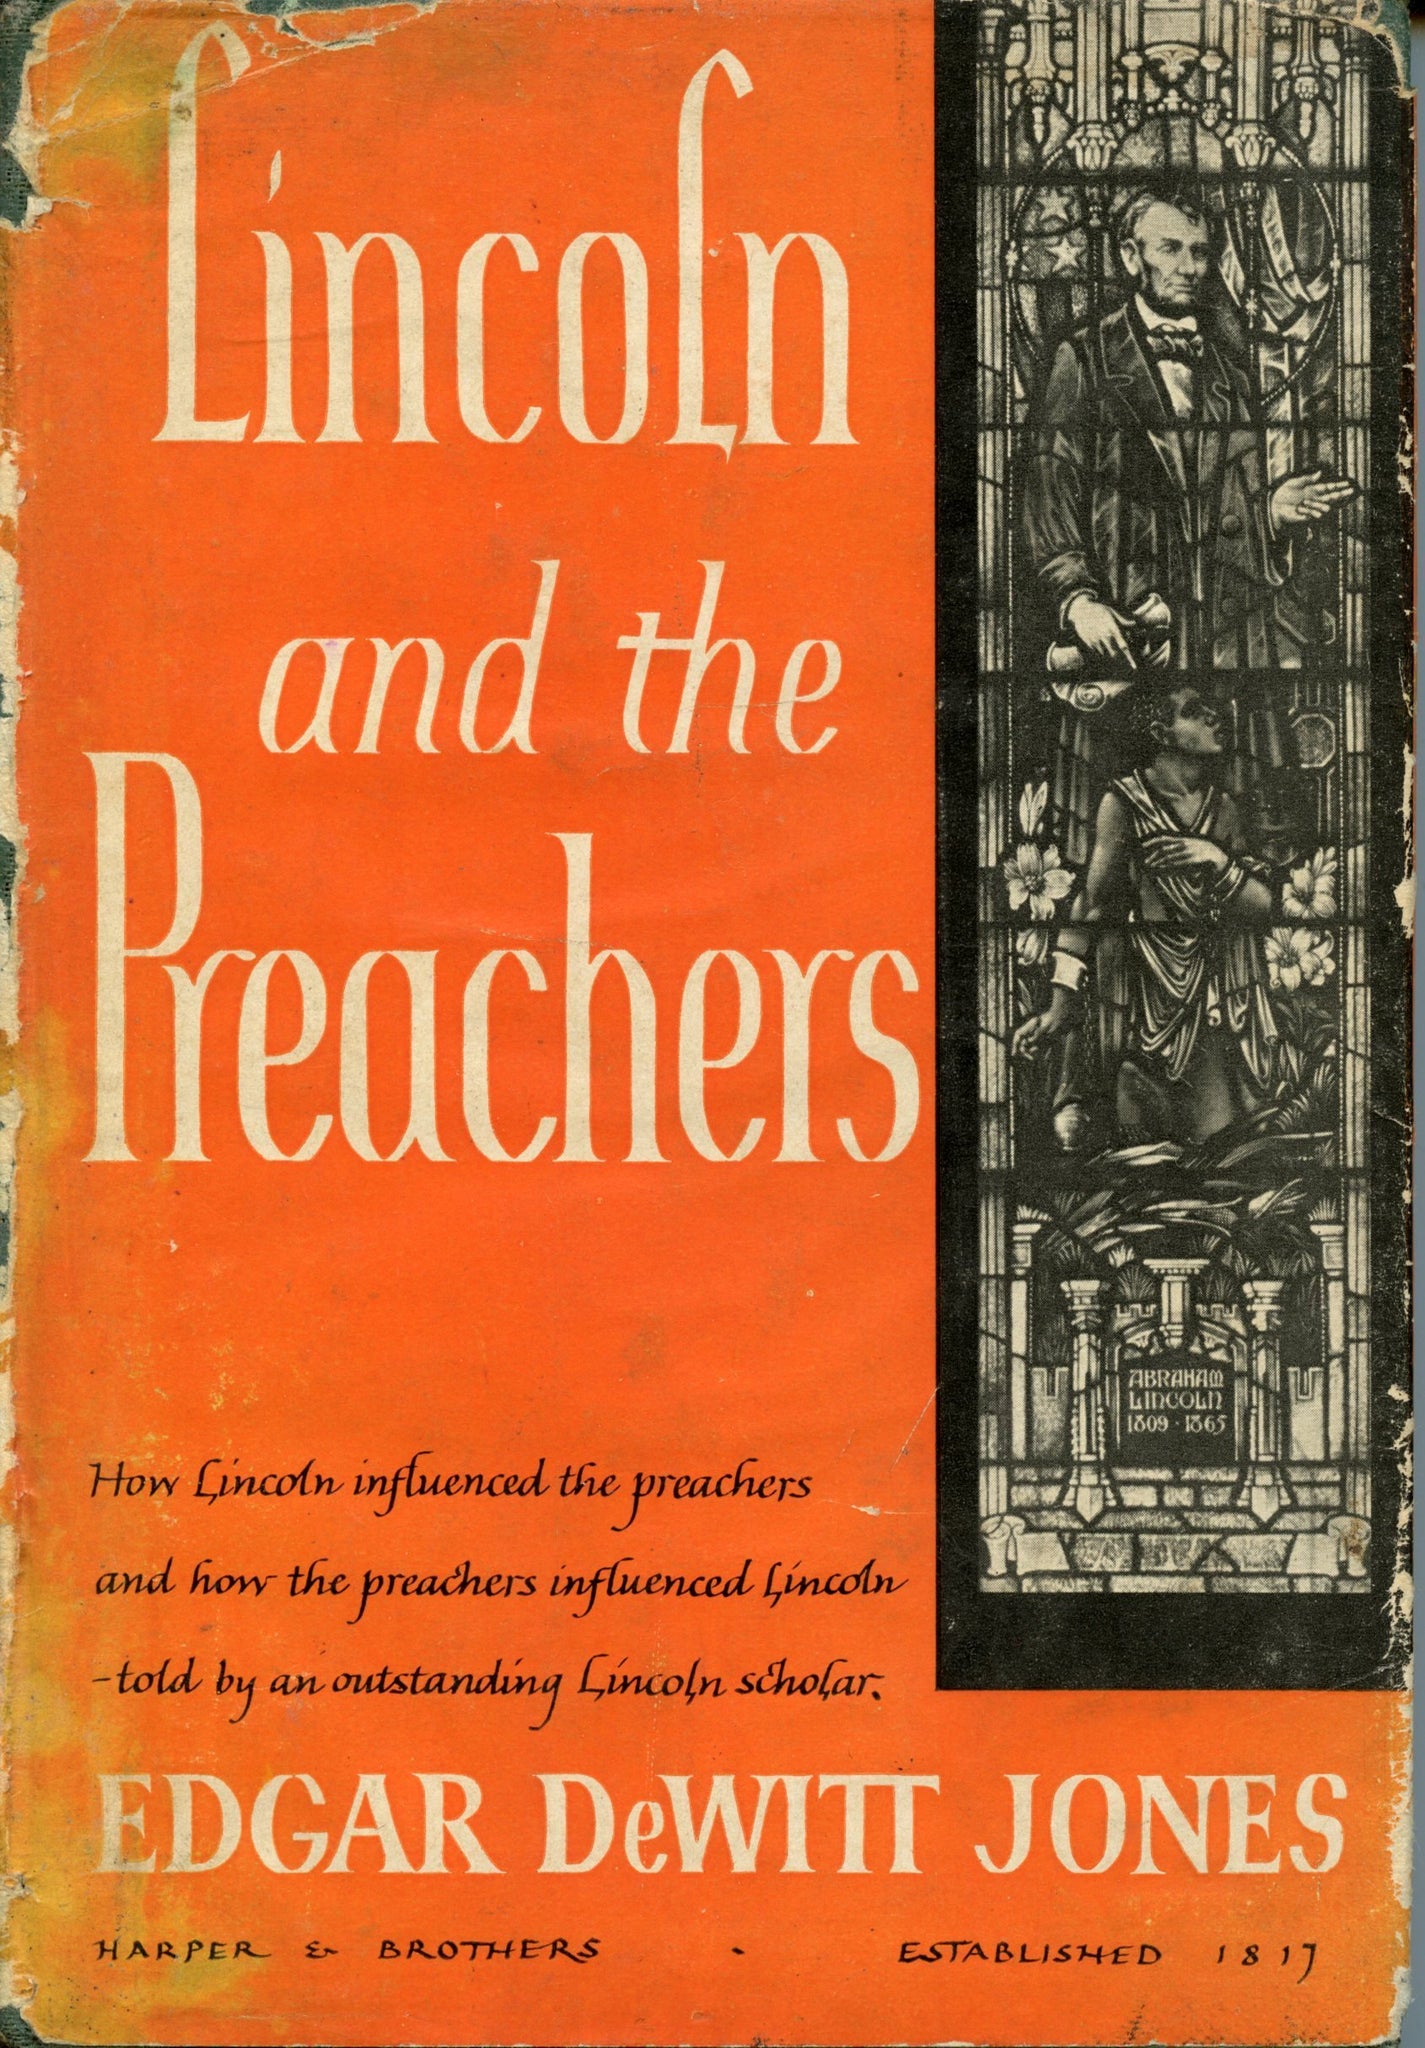 Lincoln and the Preachers